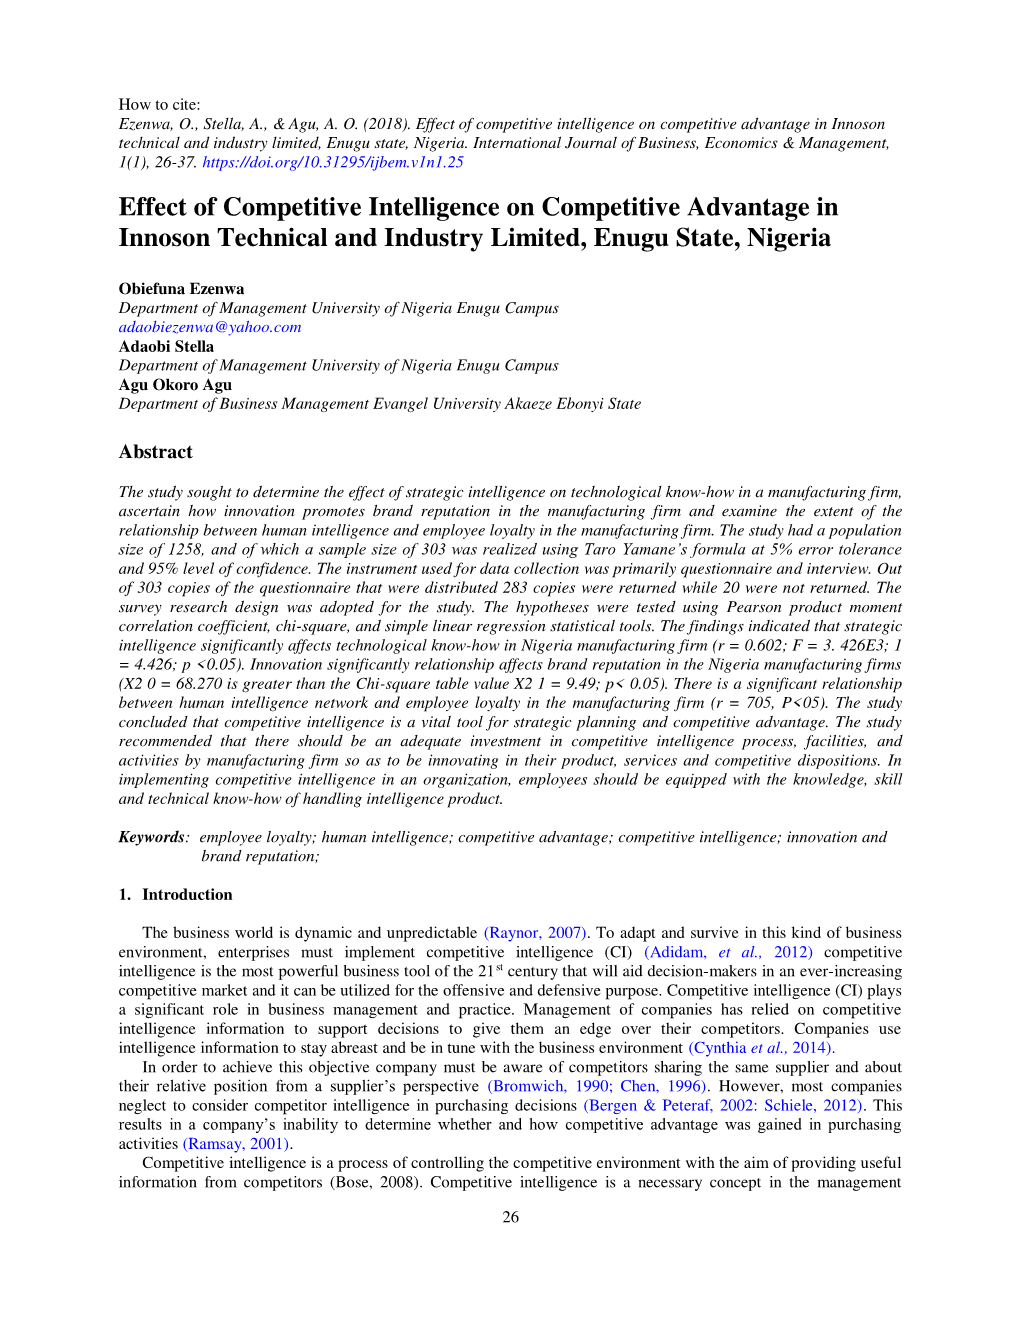 Effect of Competitive Intelligence on Competitive Advantage in Innoson Technical and Industry Limited, Enugu State, Nigeria